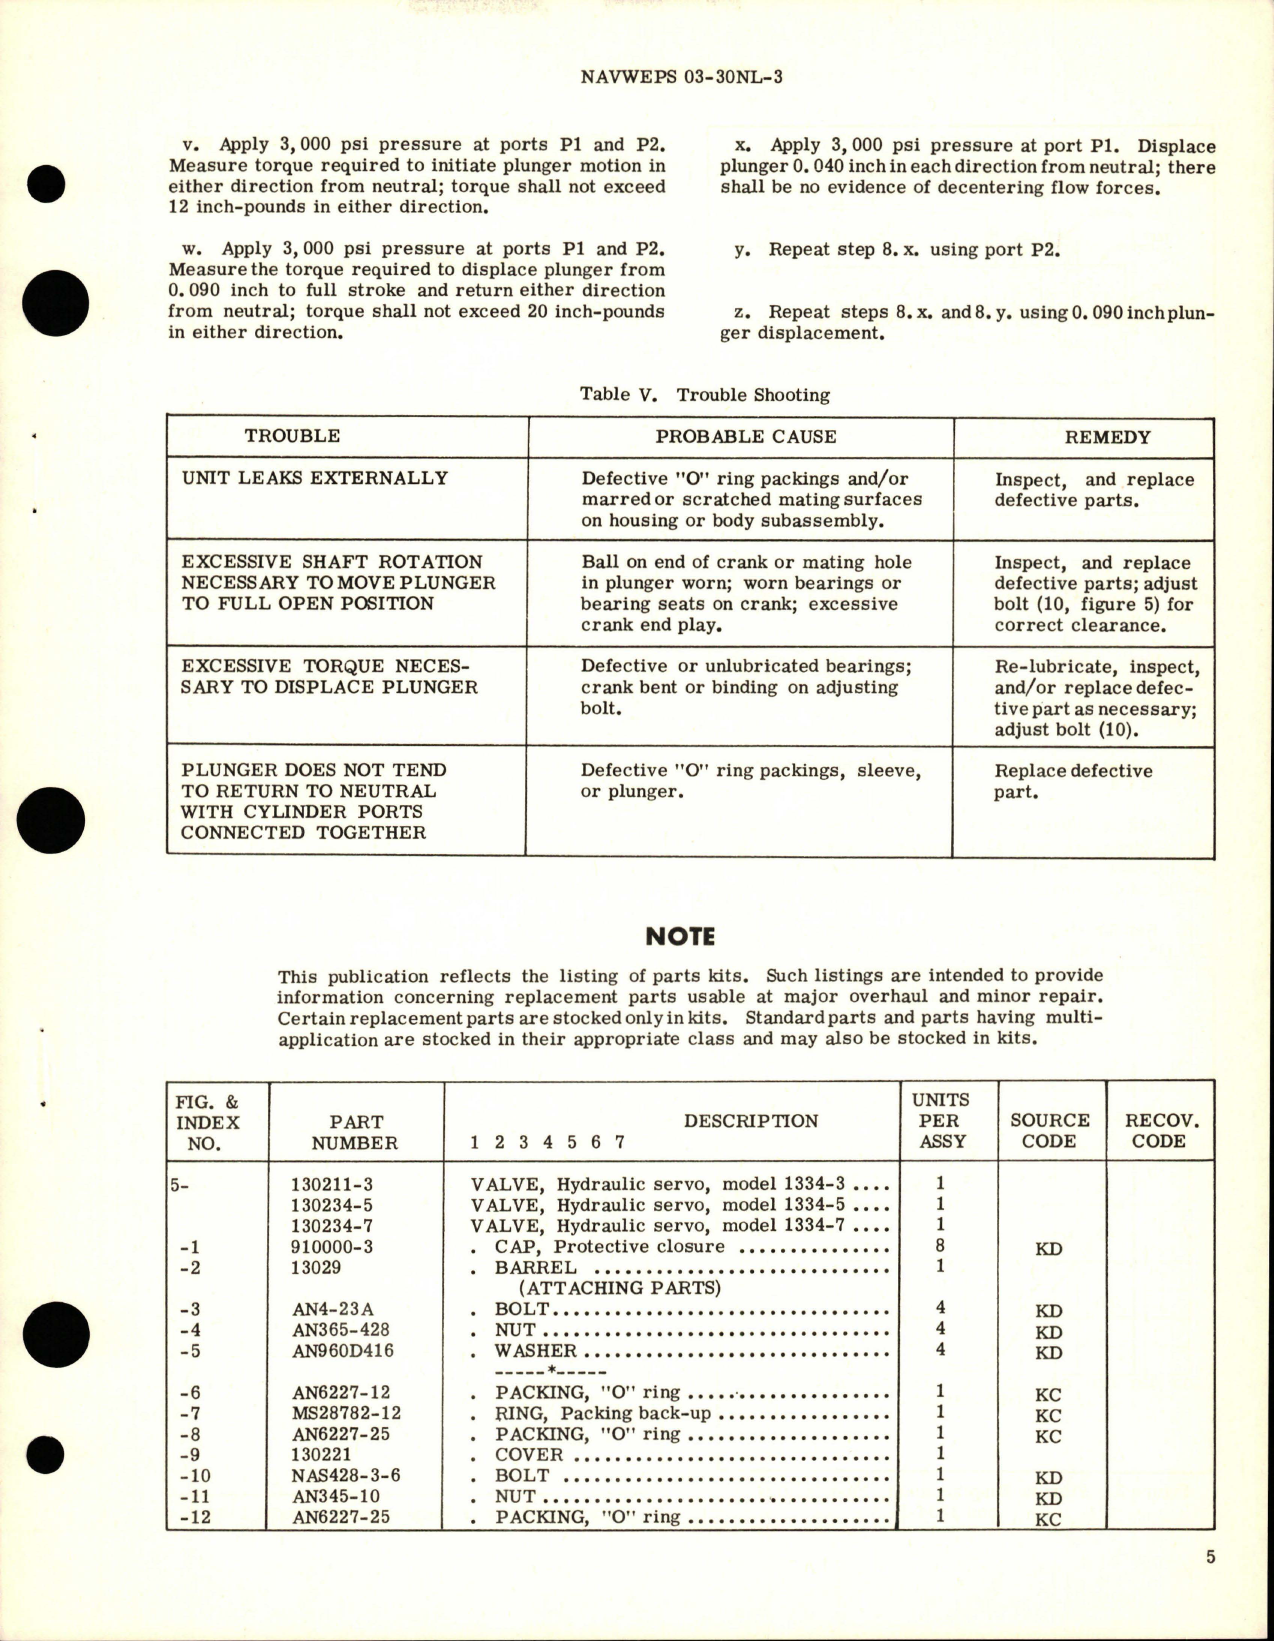 Sample page 5 from AirCorps Library document: Overhaul Instructions with Illustrated Parts for Hydraulic Servo Valve - Parts 130211-3, 130234-5, and 130234-7